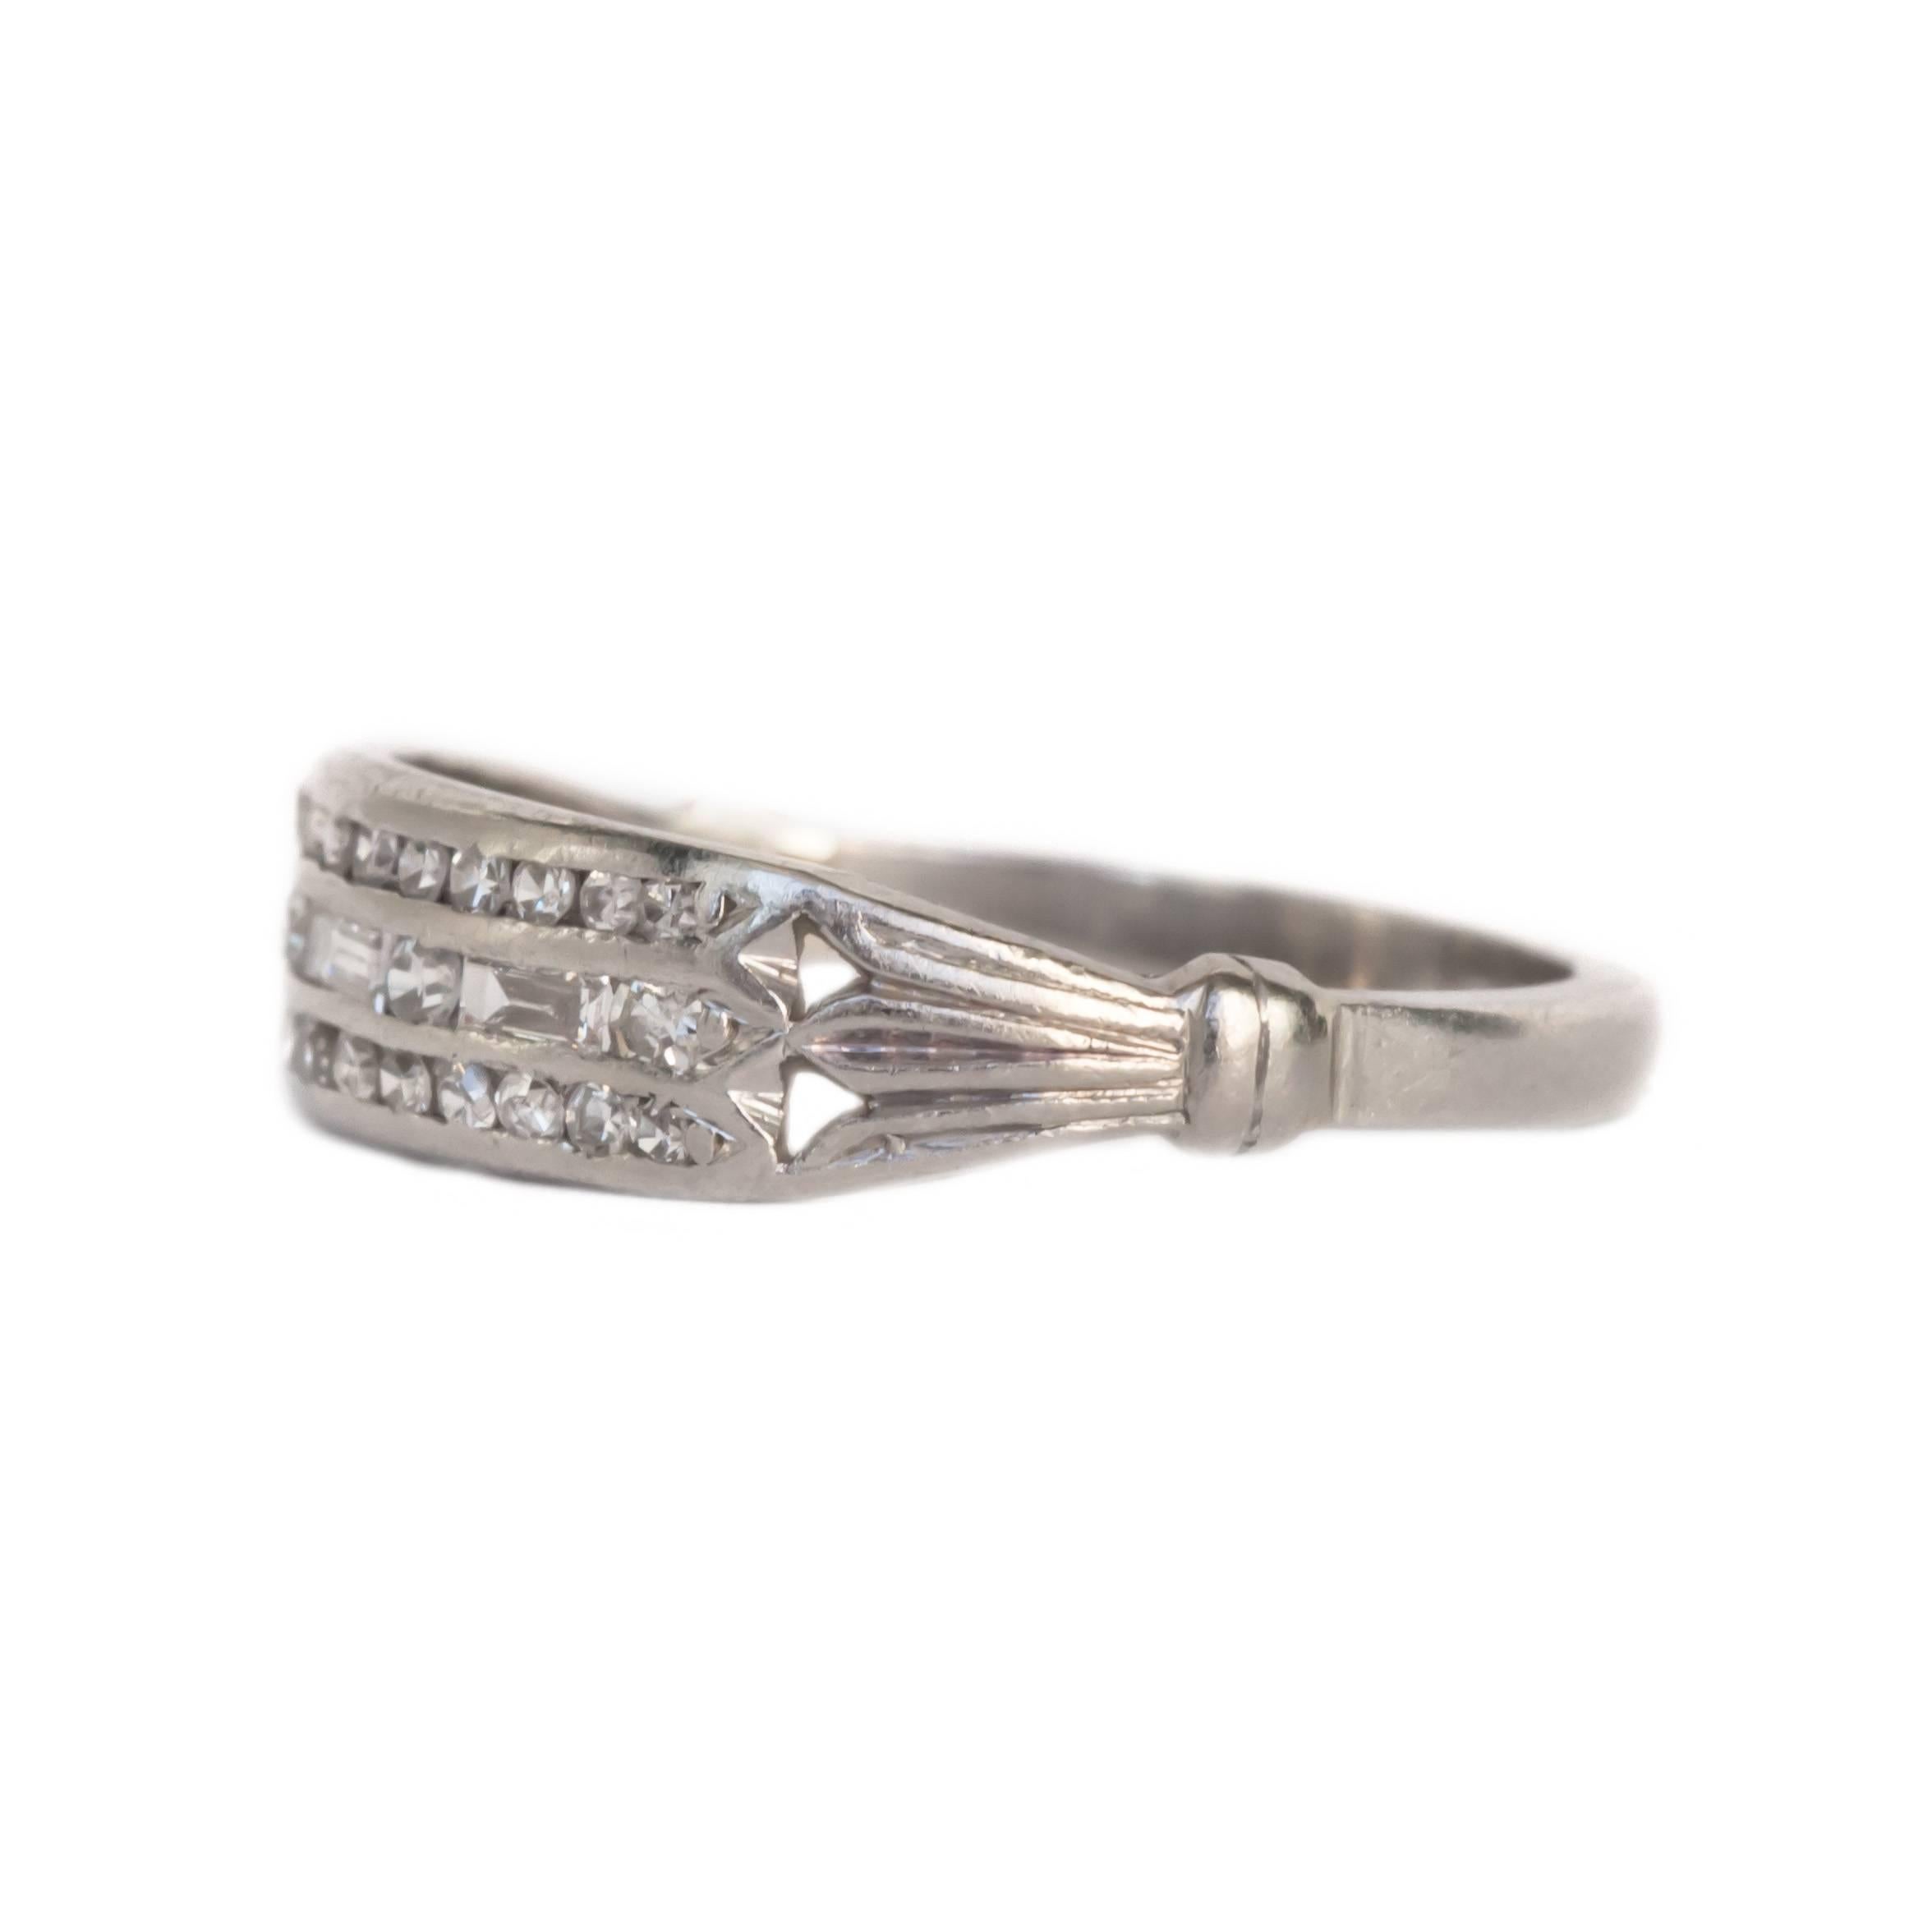 Item Details: 
Ring Size: 5.50
Metal Type: Platinum
Weight: 2.4 grams

Diamond Details:
Shape: Antique Single Cut & Antique Straight Baguette
Carat Weight: .35 carat, total weight
Color: F-G
Clarity: VS1

Finger to Top of Stone Measurement: 1.19mm